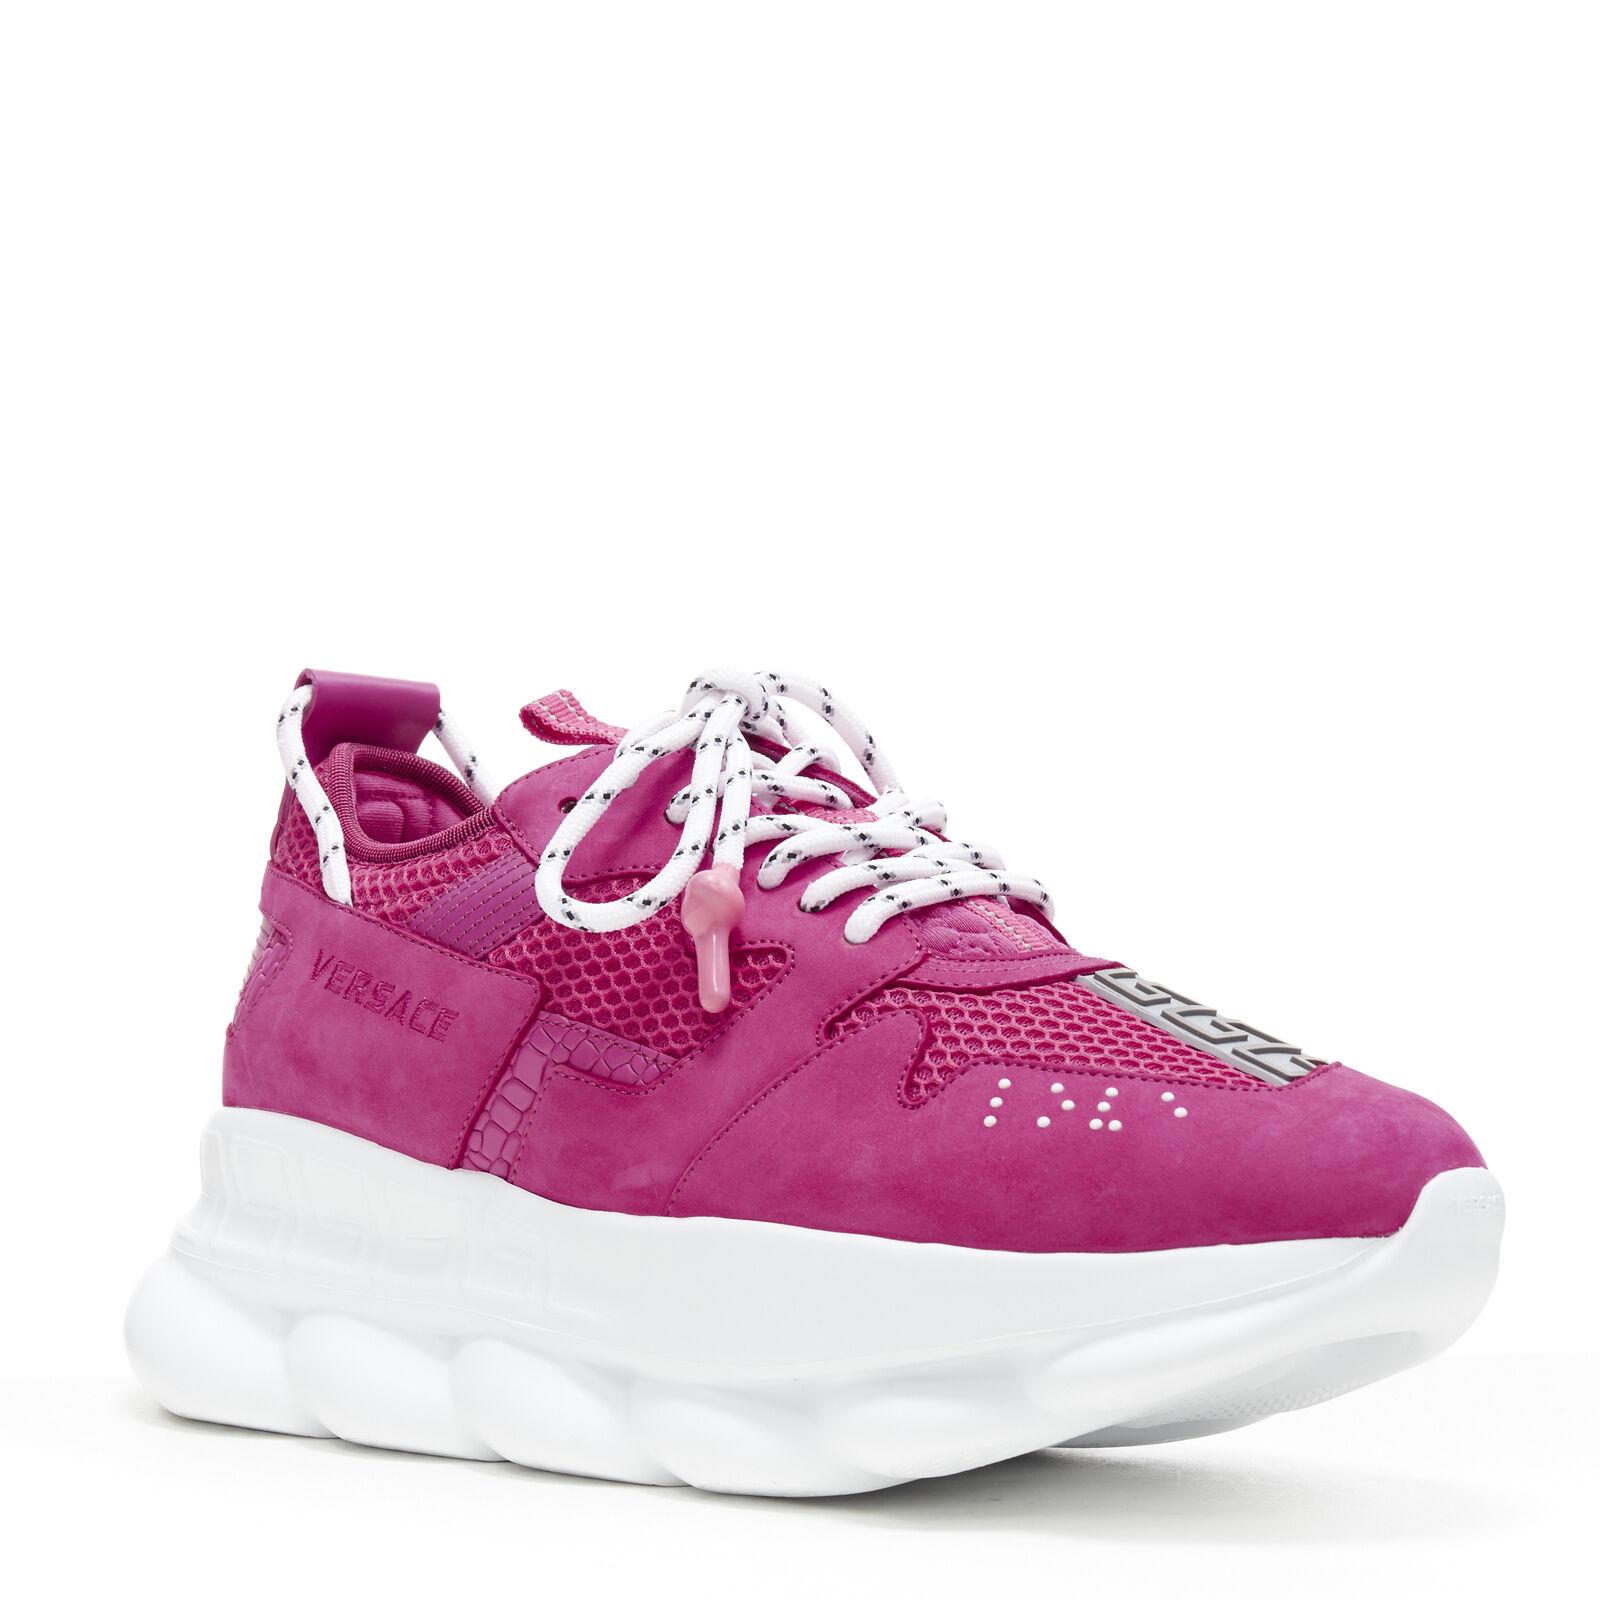 new VERSACE Chain Reaction Blowzy shocking pink suede chunky dad sneaker EU41.5
Reference: TGAS/B01349
Brand: Versace
Designer: Donatella Versace
Model: Versace Chain Reaction
Material: Fabric, Leather
Color: Pink
Pattern: Solid
Closure: Lace